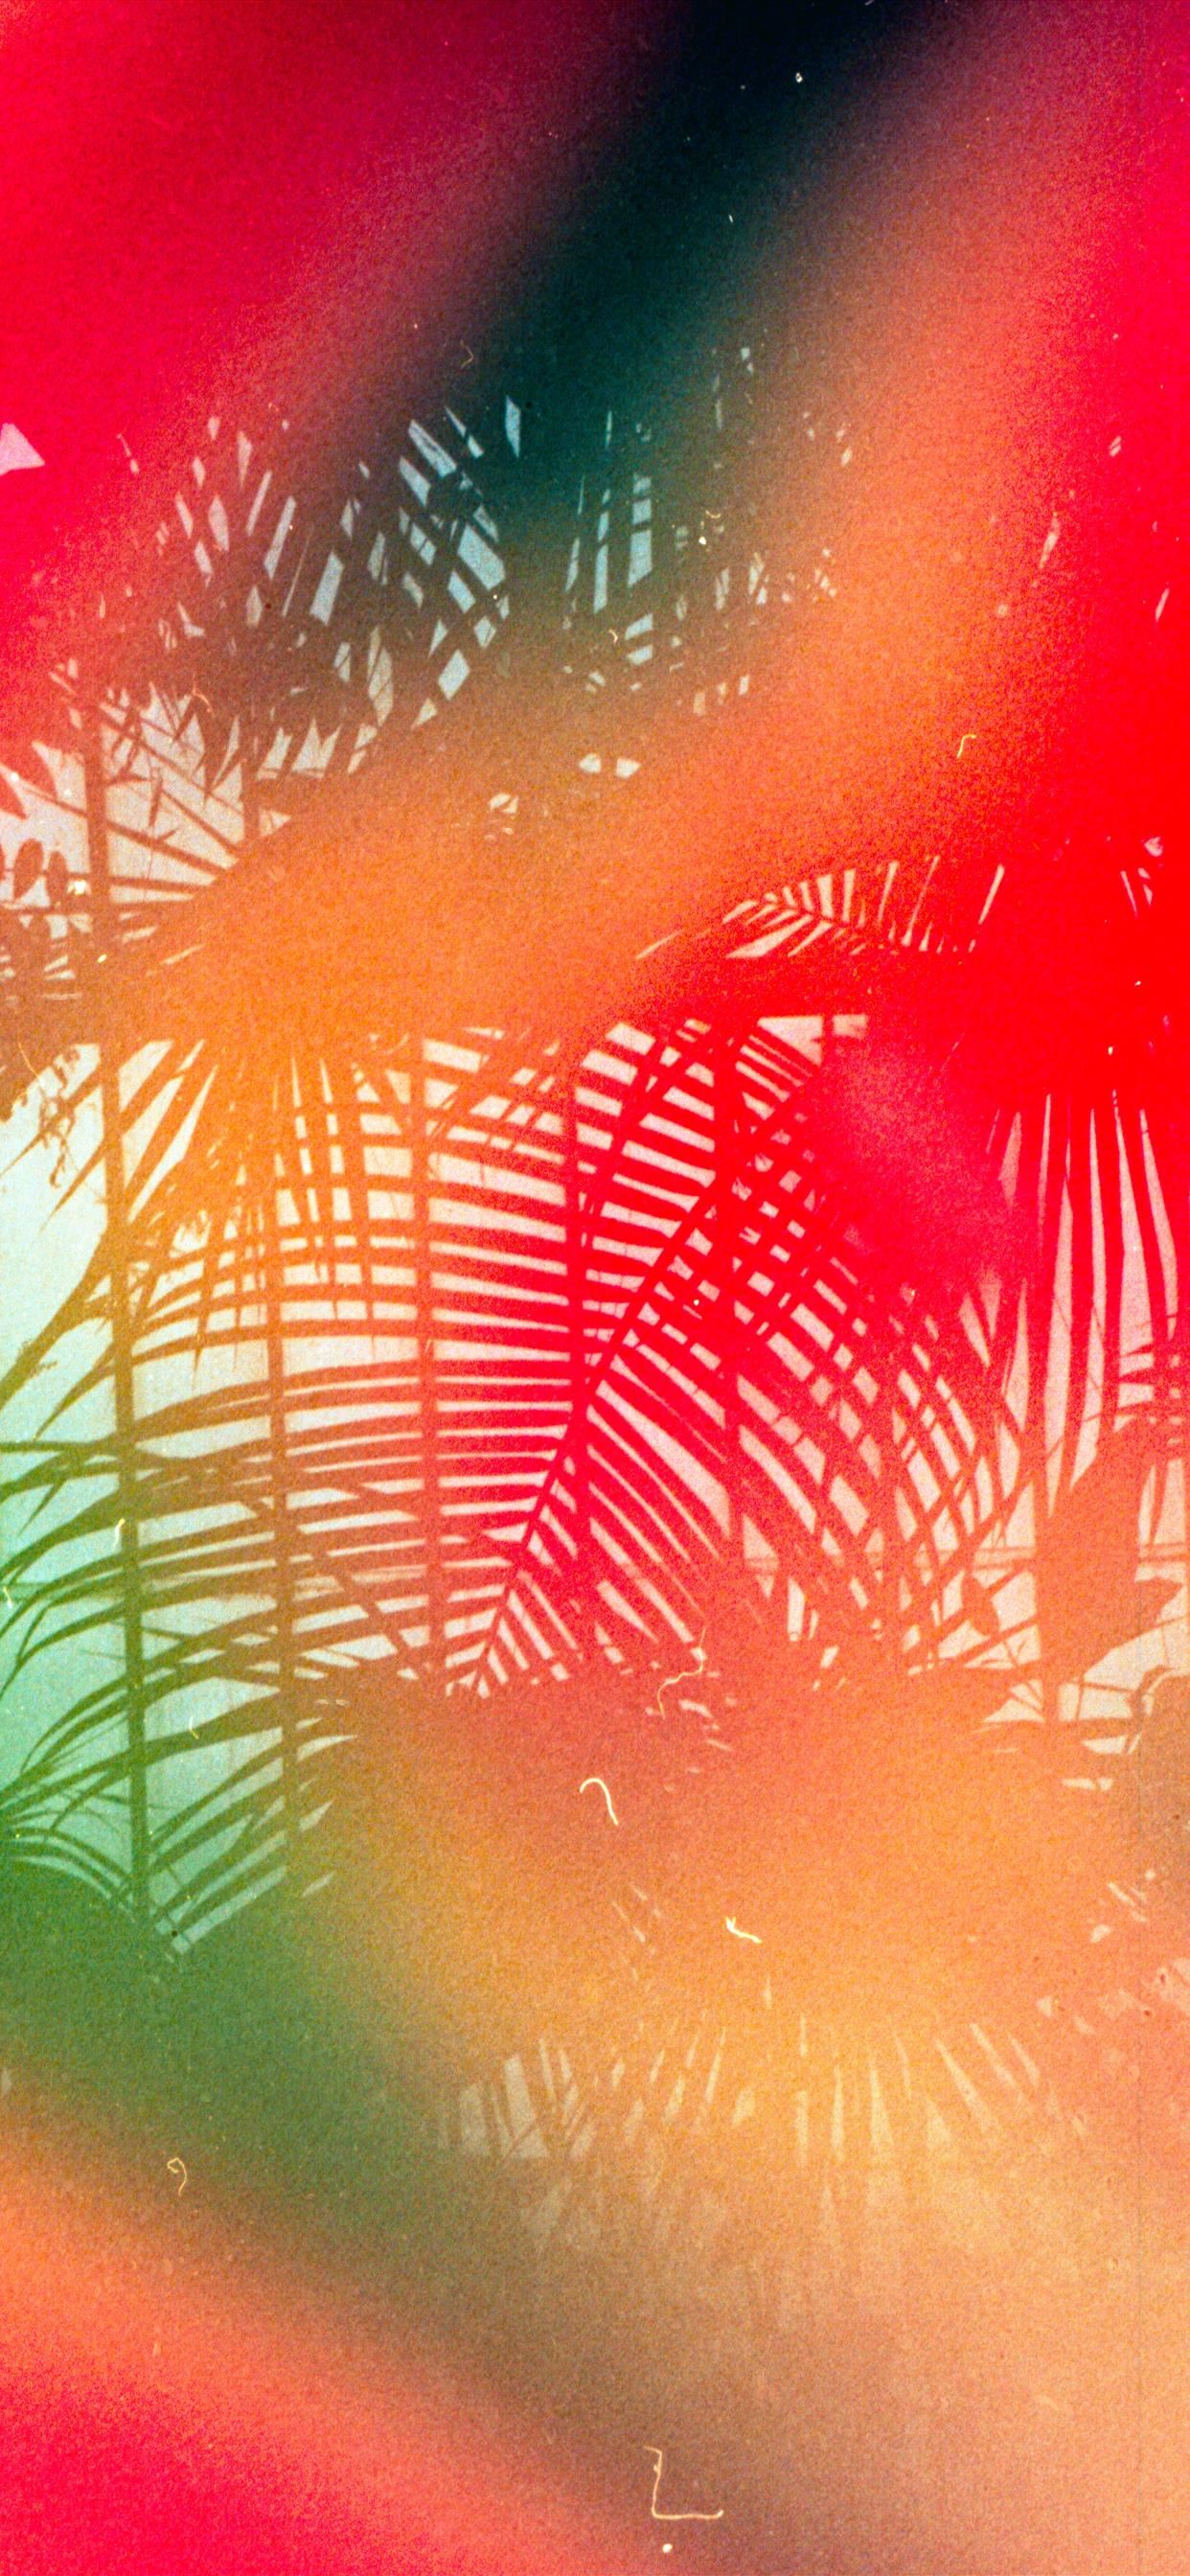 Tropical Leaves Shot On 35mm Leica Mda With Dub iPhone